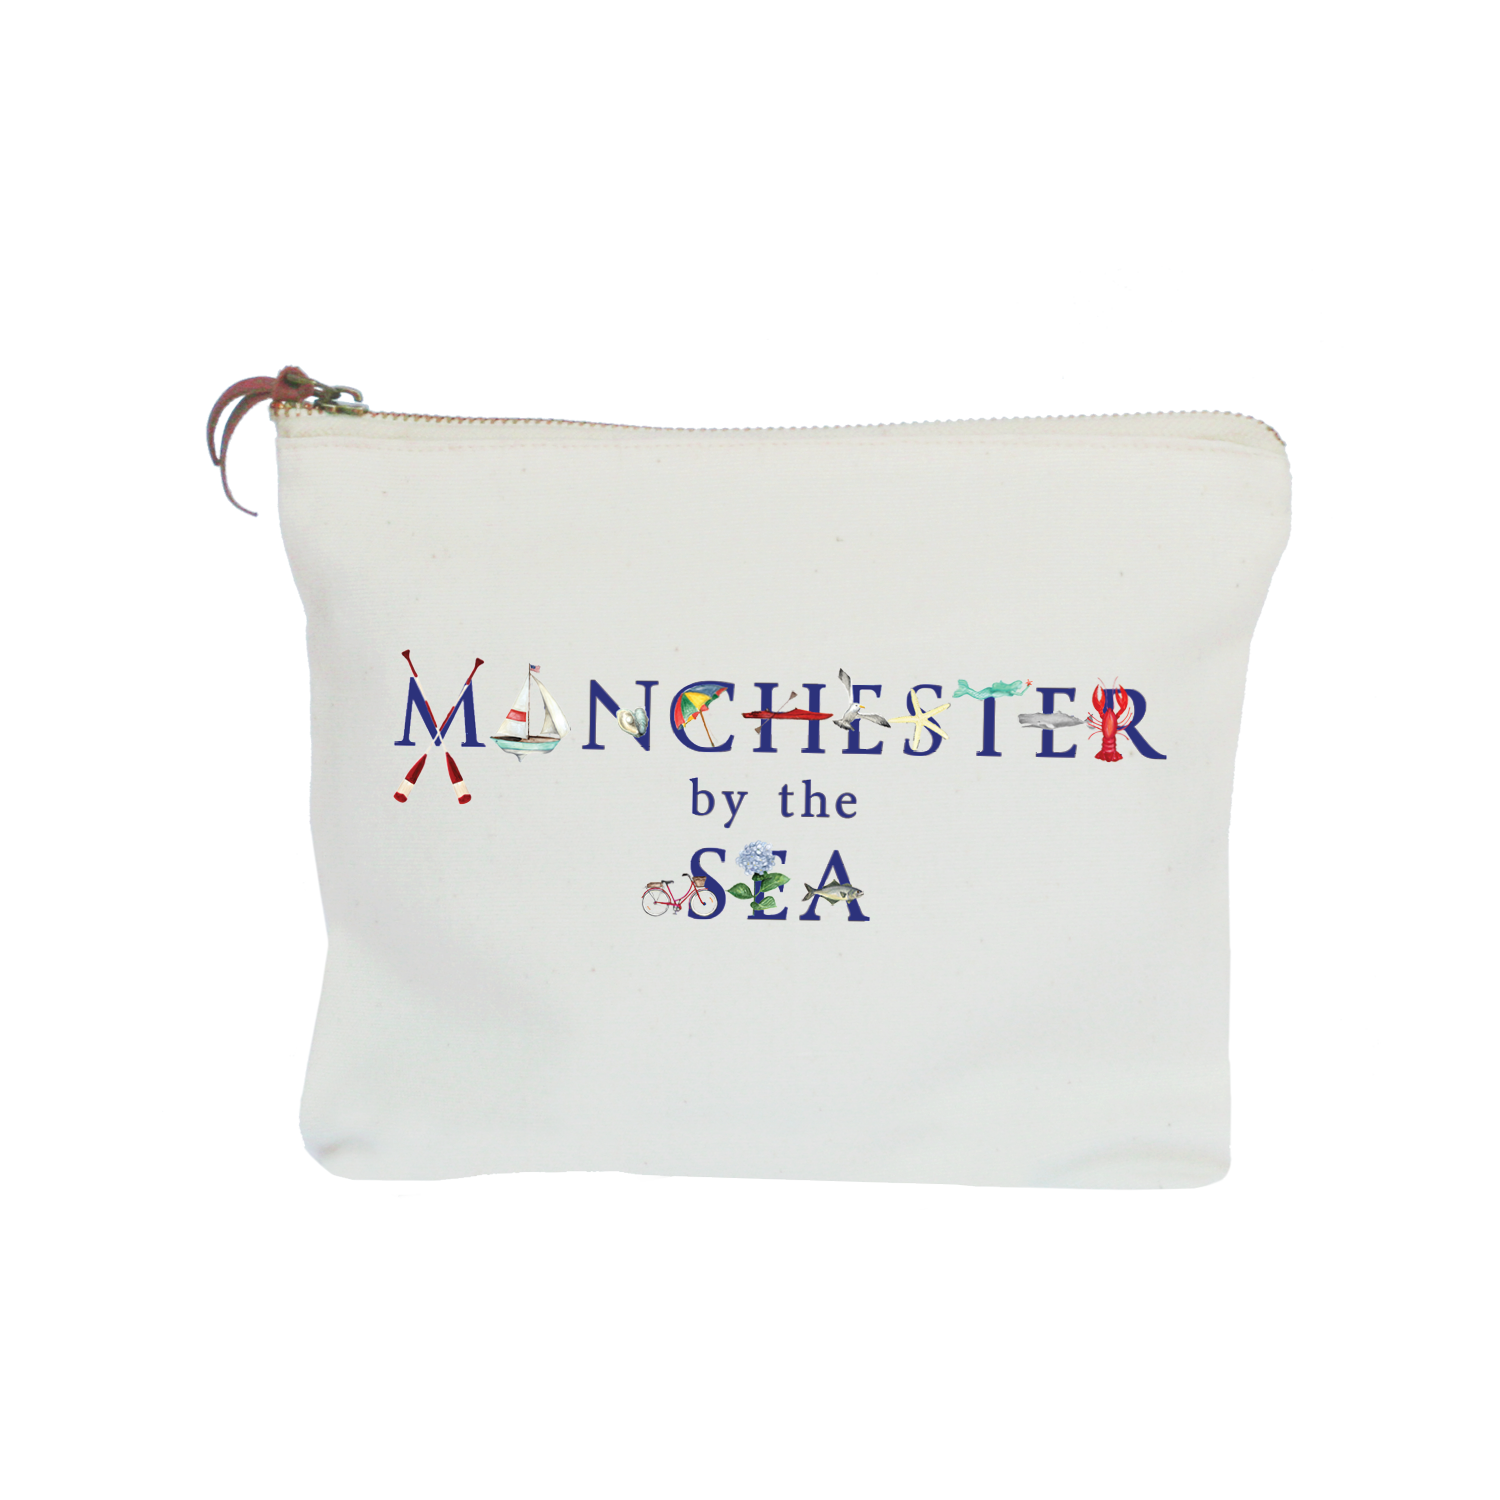 manchester-by-the-sea zipper pouch